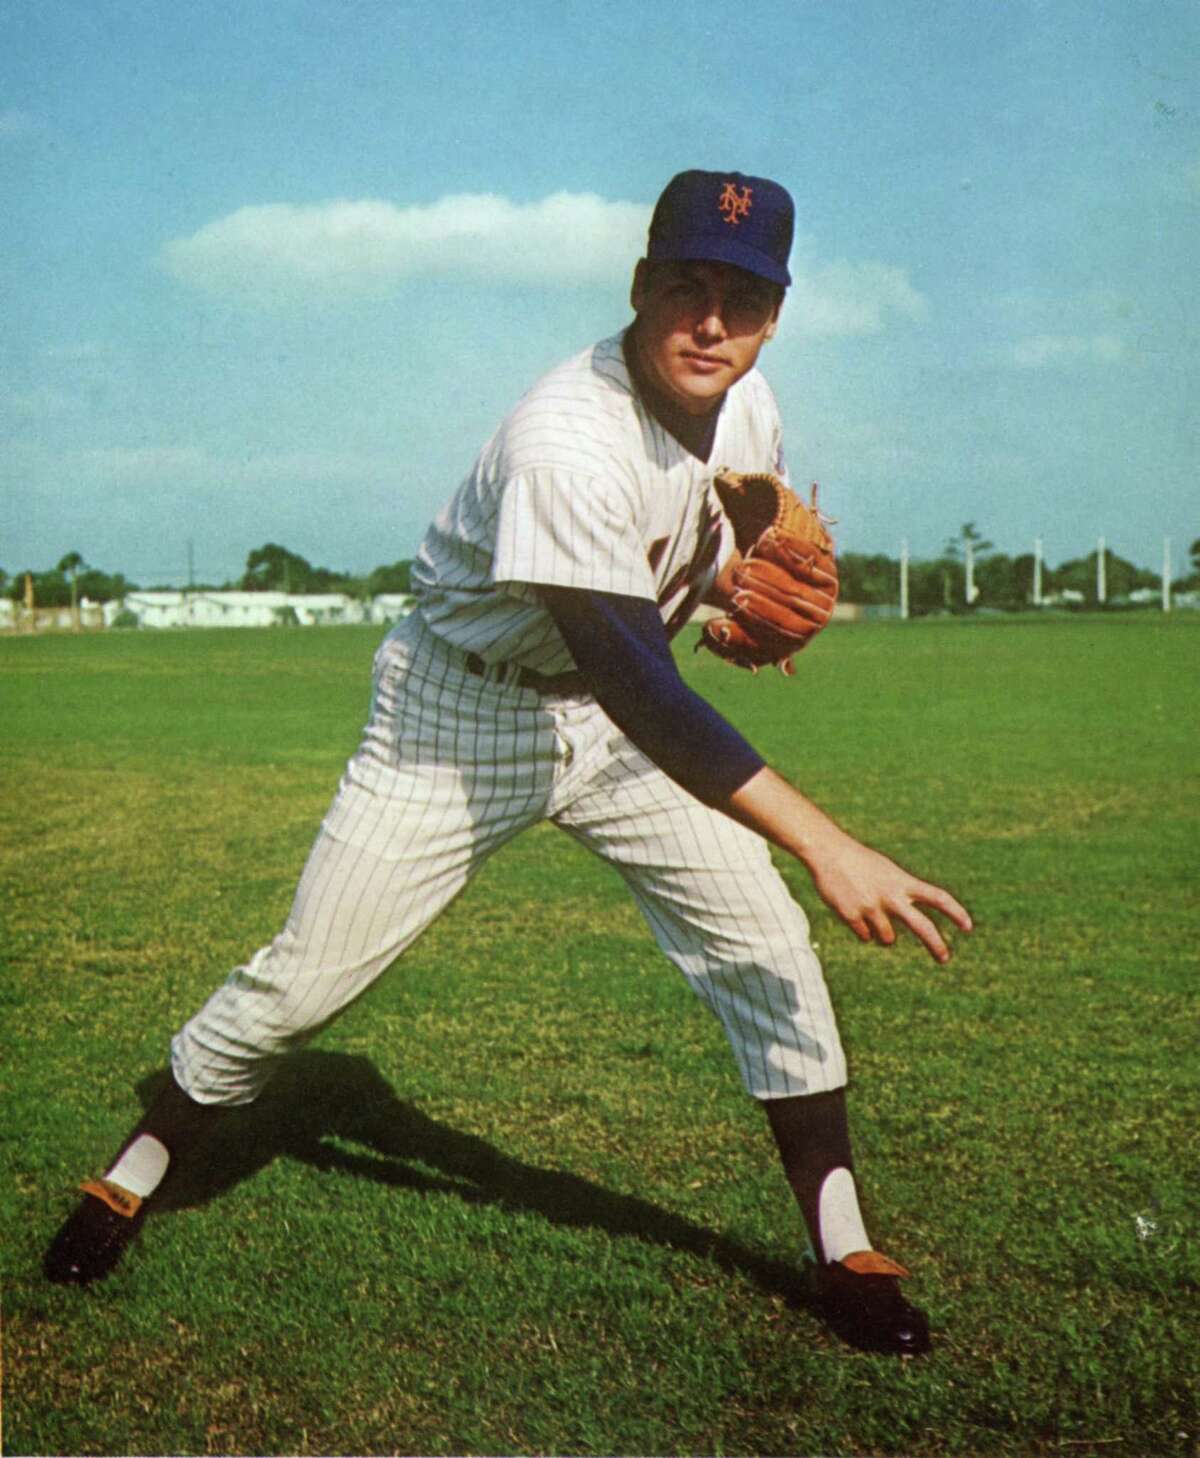 Tom Seaver of the New York Mets takes a pitching pose in 1974.